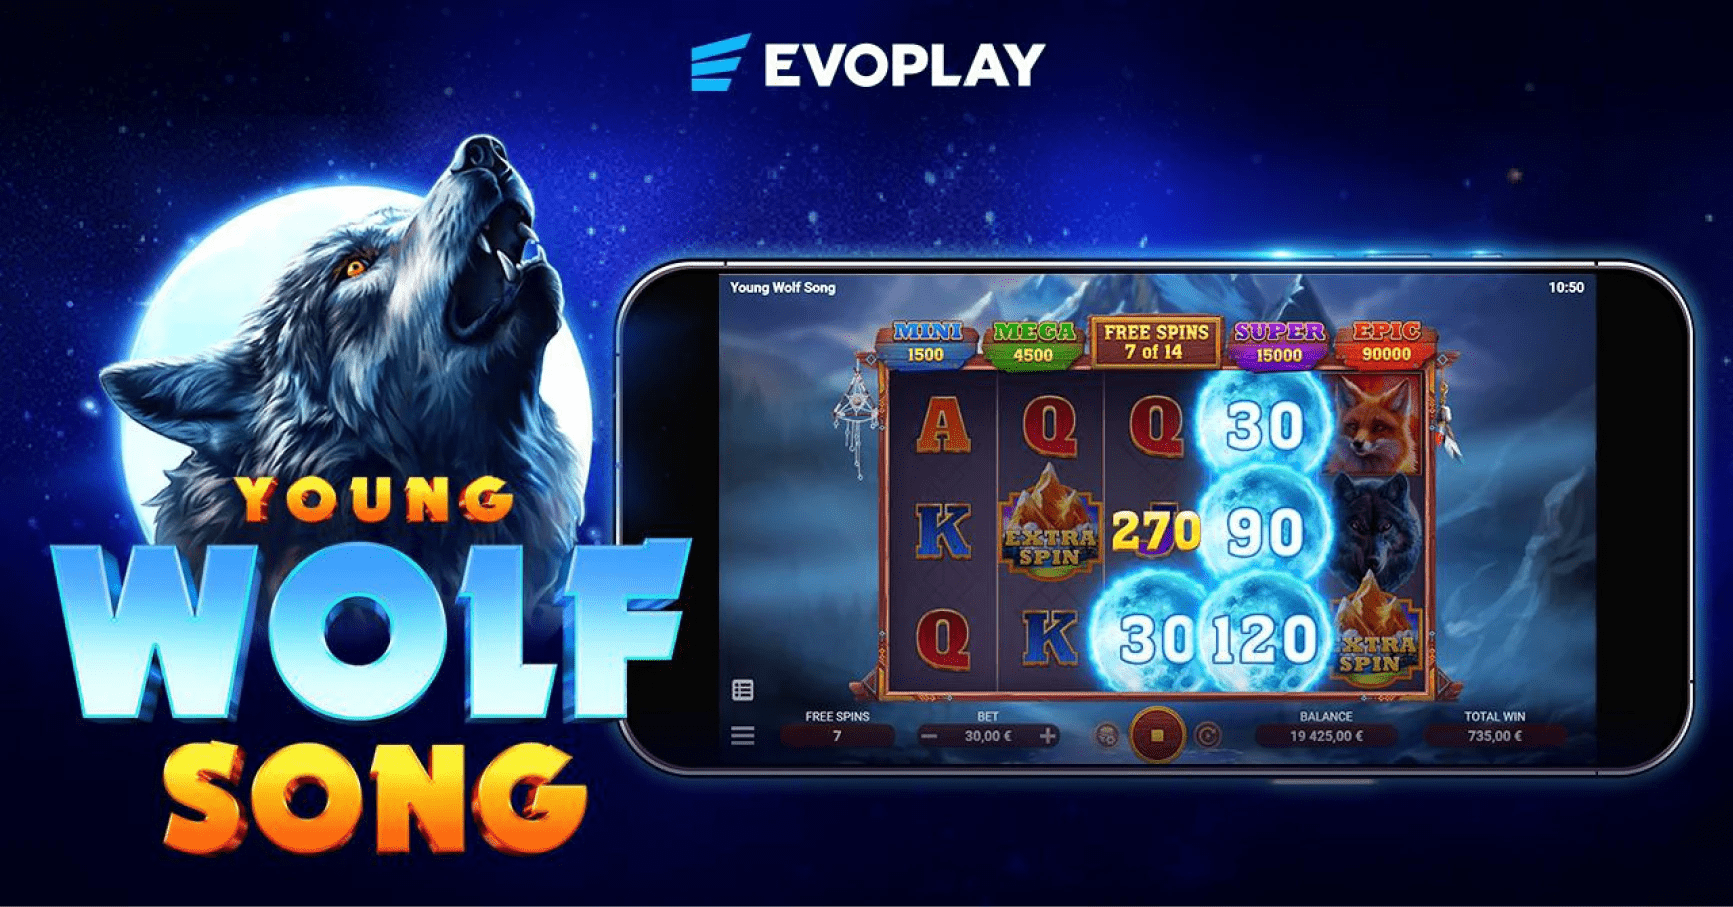 Evoplay’s New Slot Release Takes Players on a Wild Ride – Young Wolf Song